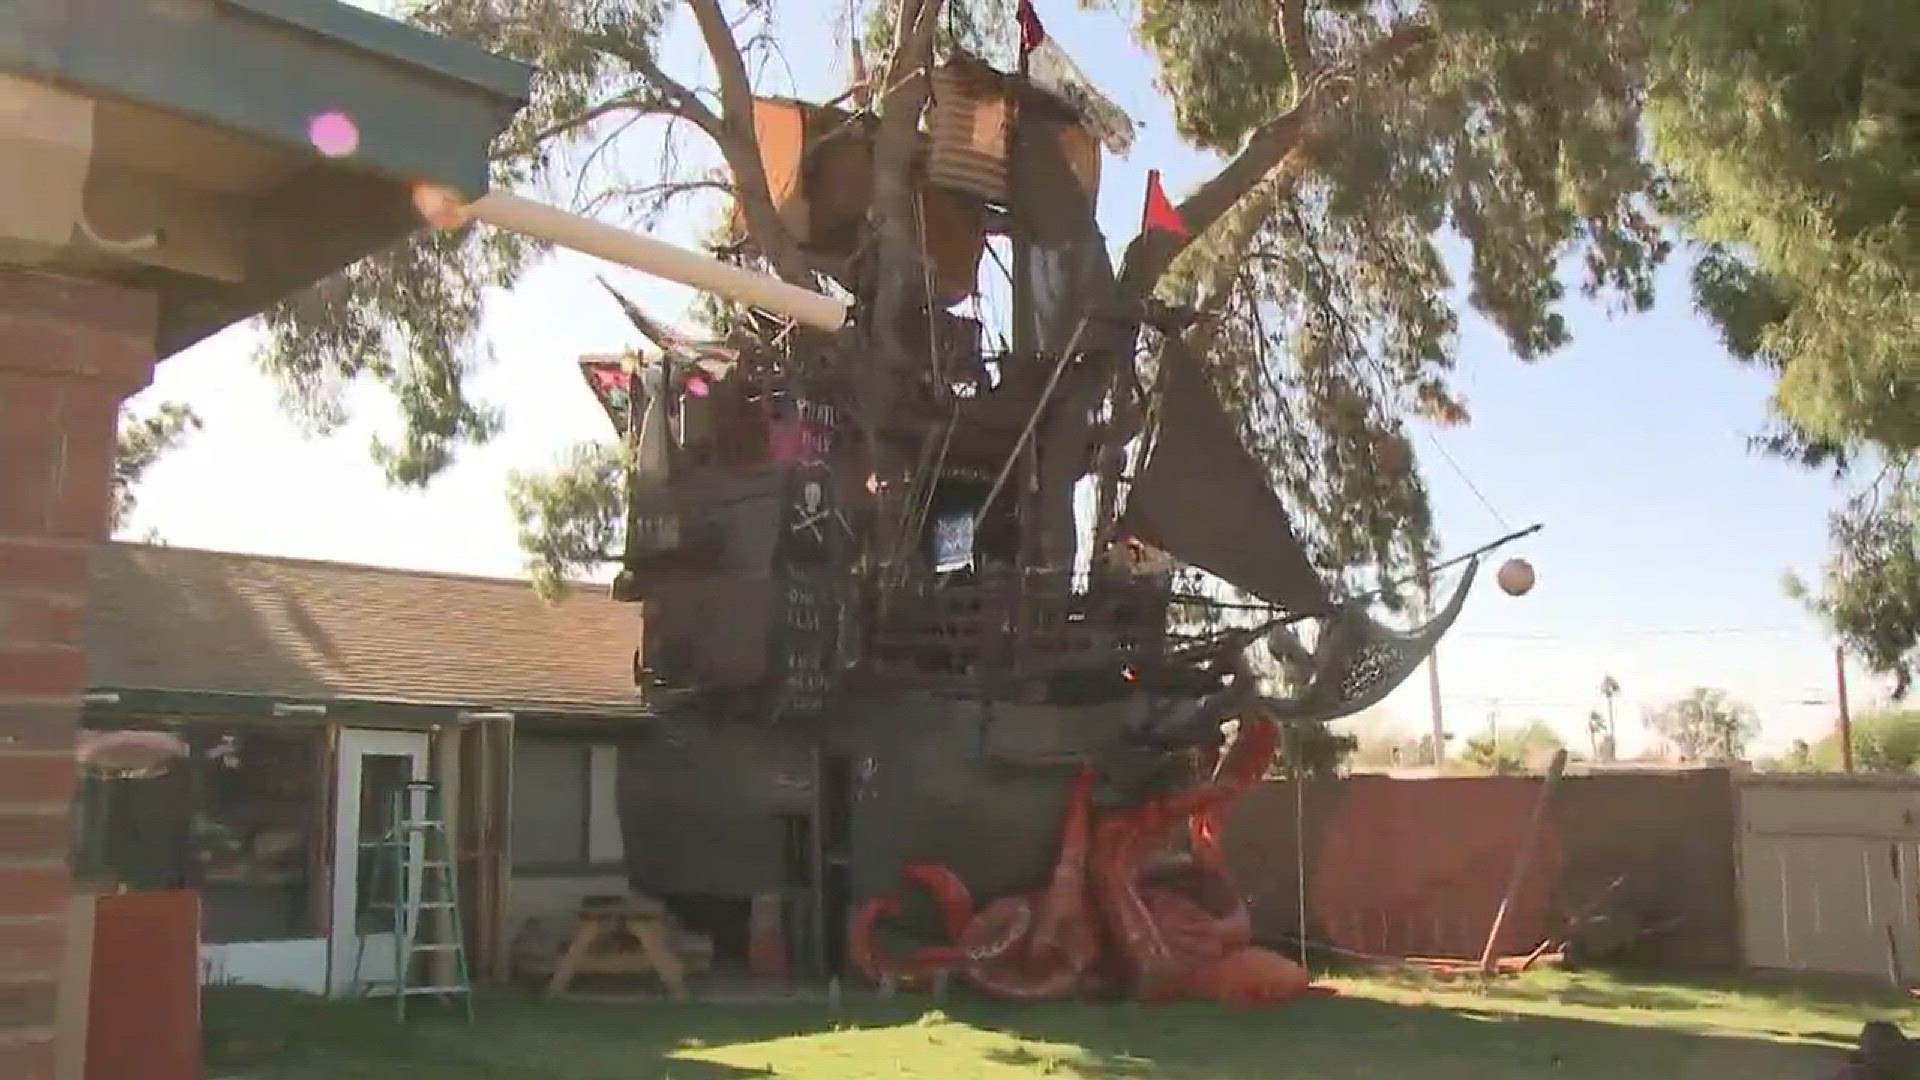 A man builds his very own life size pirate ship in his backyard.